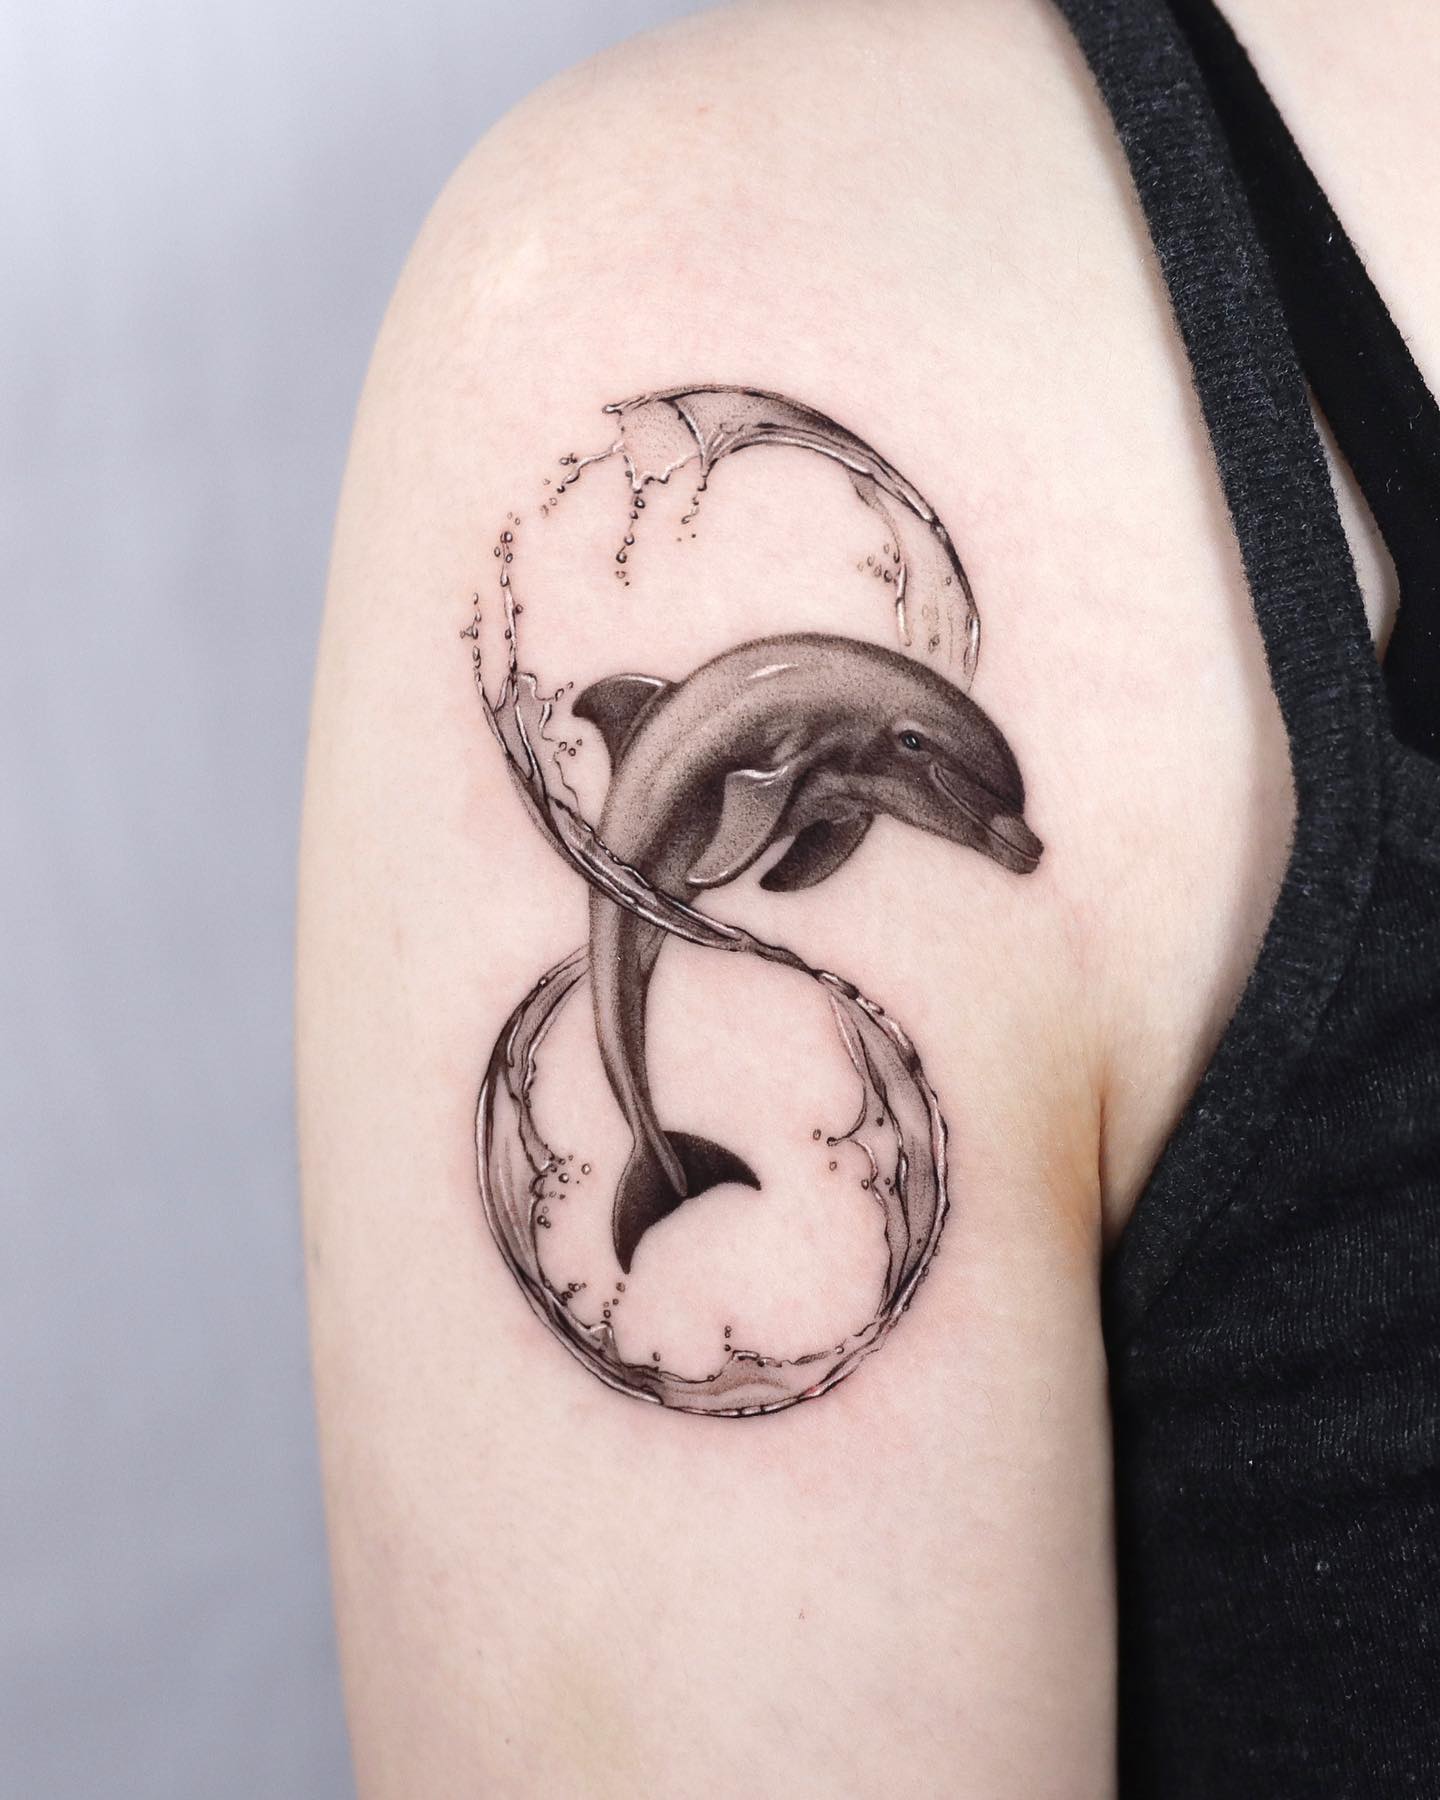 30+ Dolphin Tattoo Design Ideas for Men and Women - 100 Tattoos